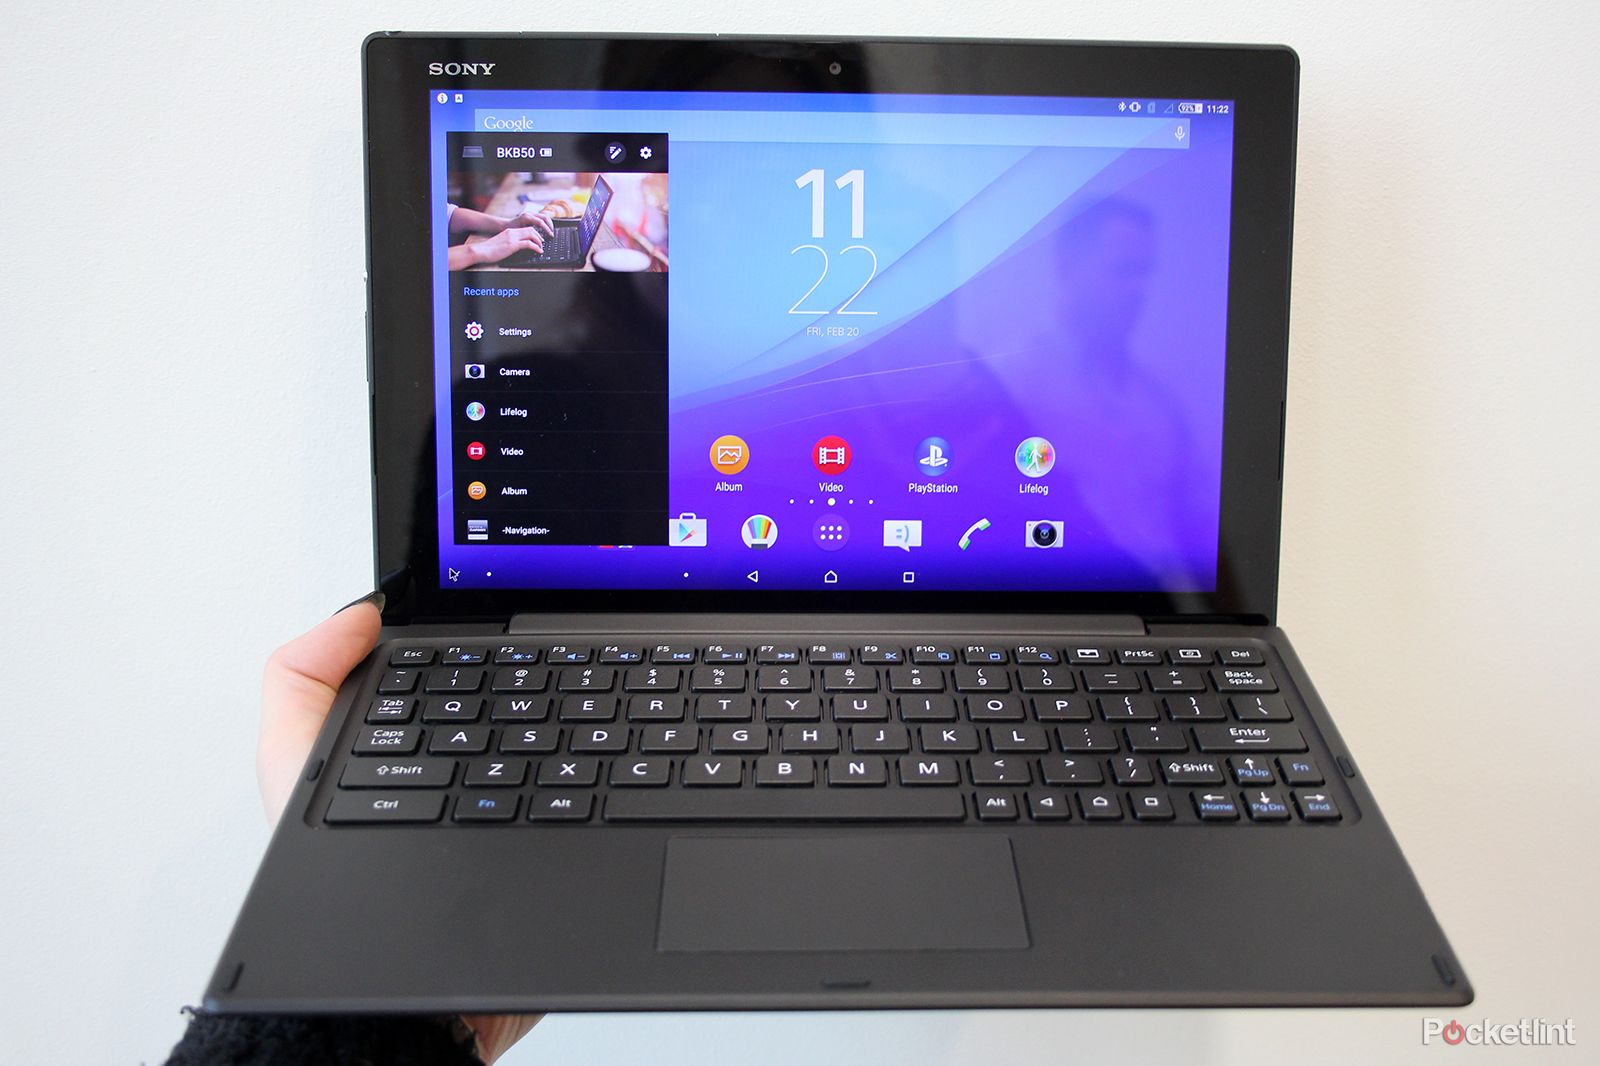 sony xperia z4 tablet hands on slimmer lighter and sexier image 31